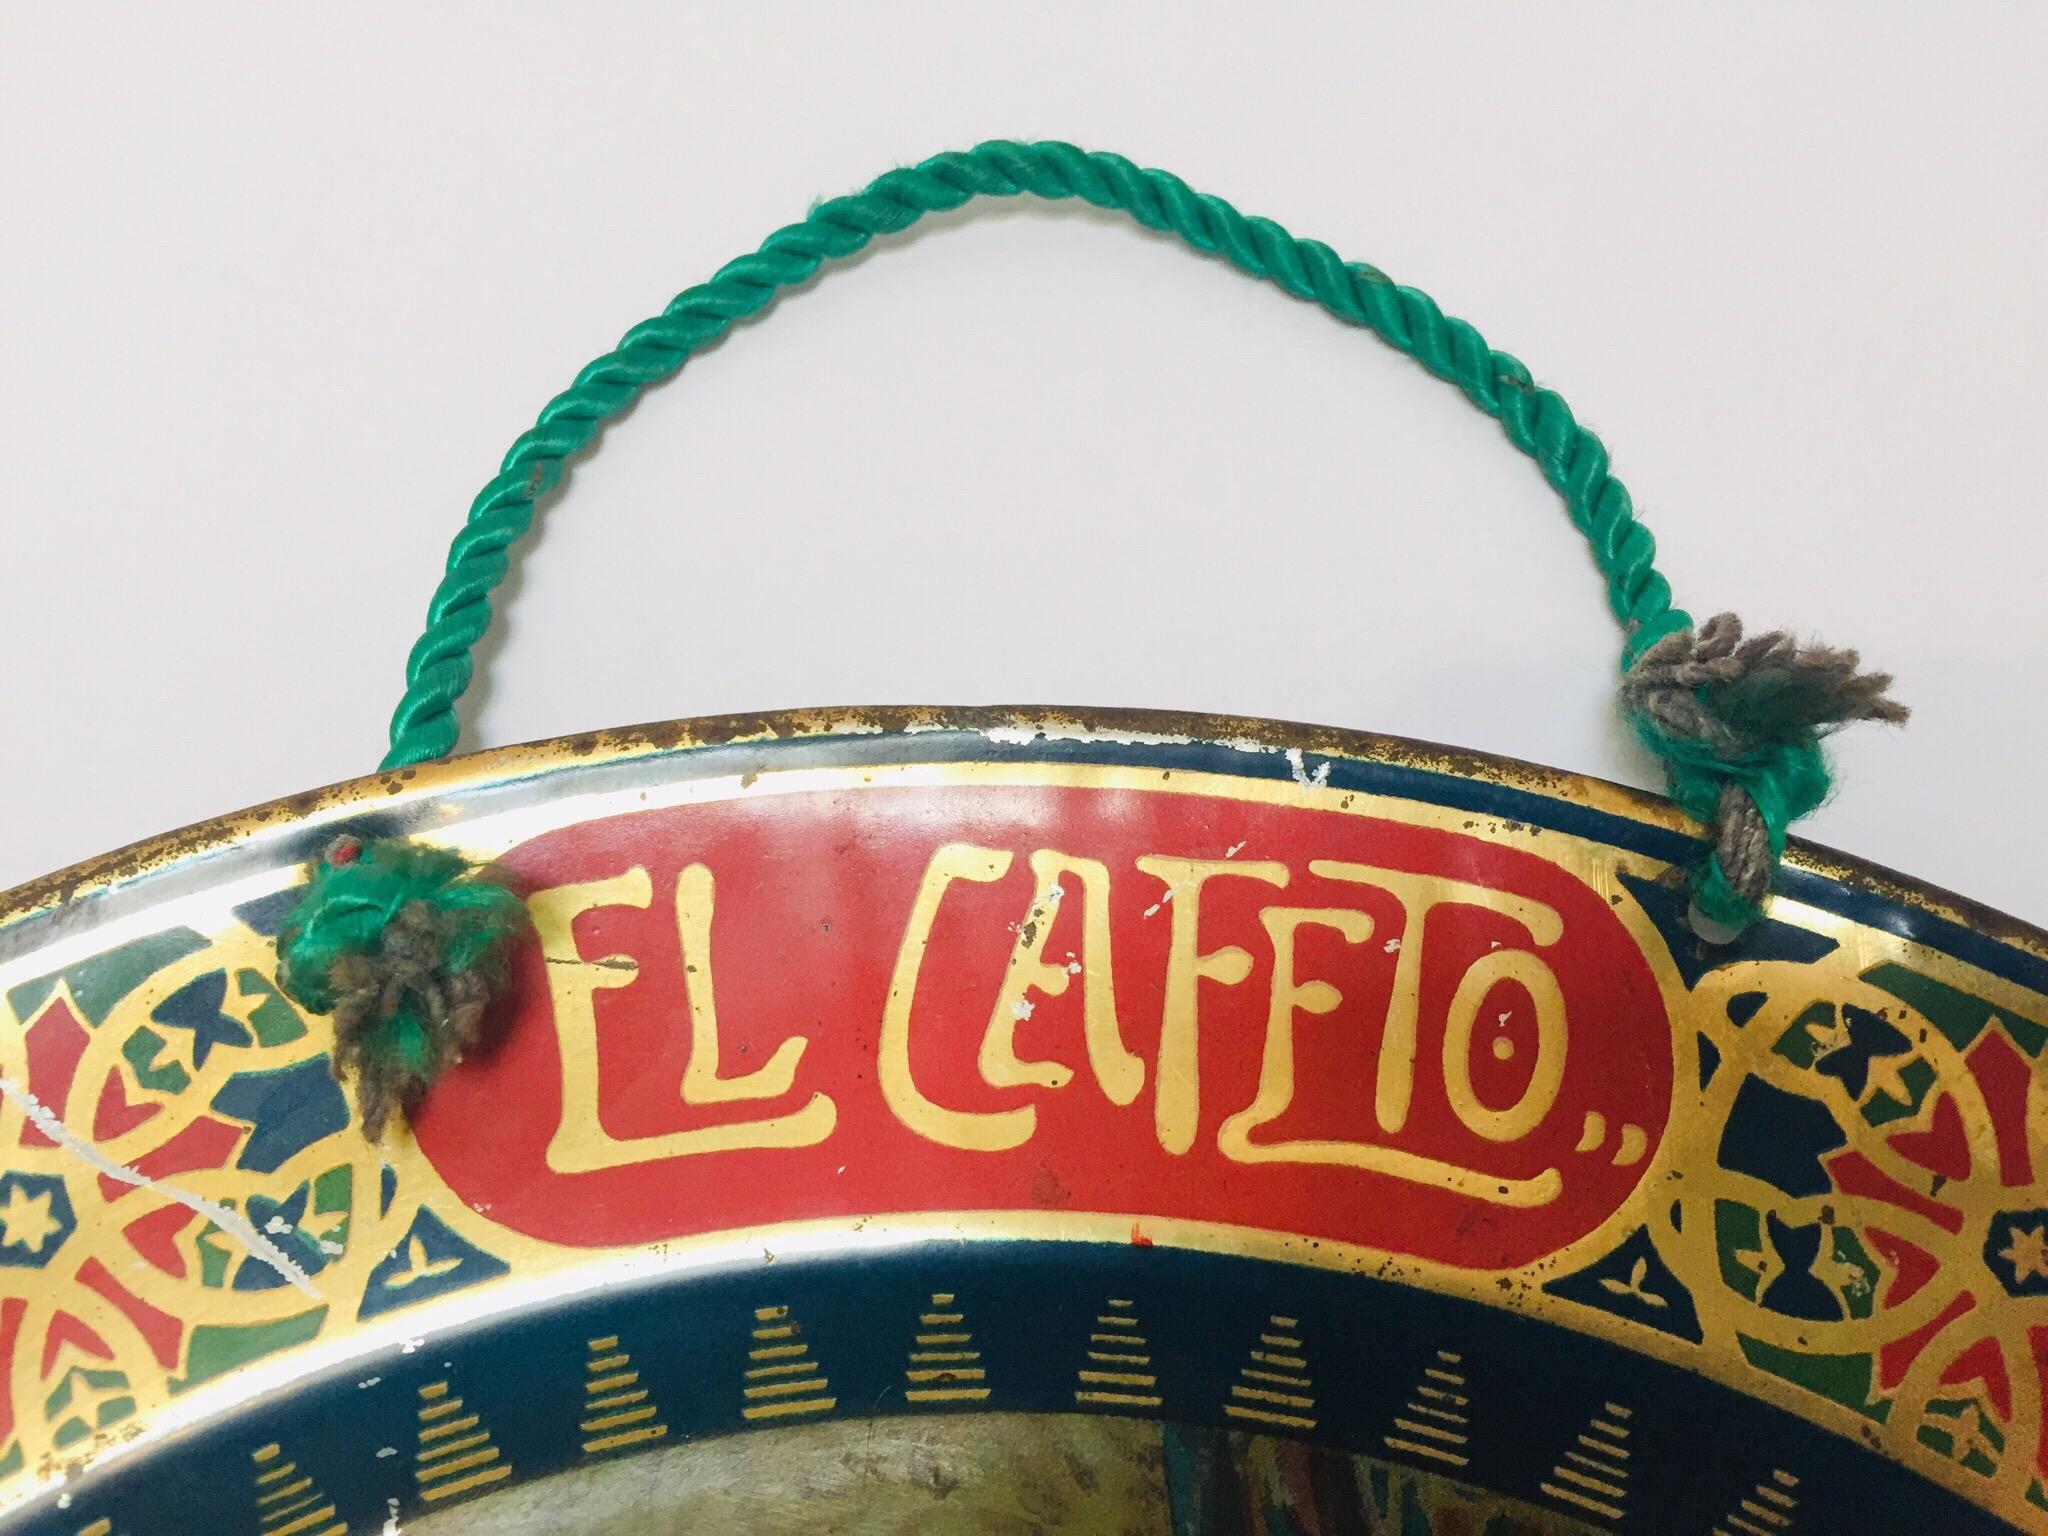 Hand-Painted El Cafeto Metal Hanging Advertising Plate with a Moorish Prince